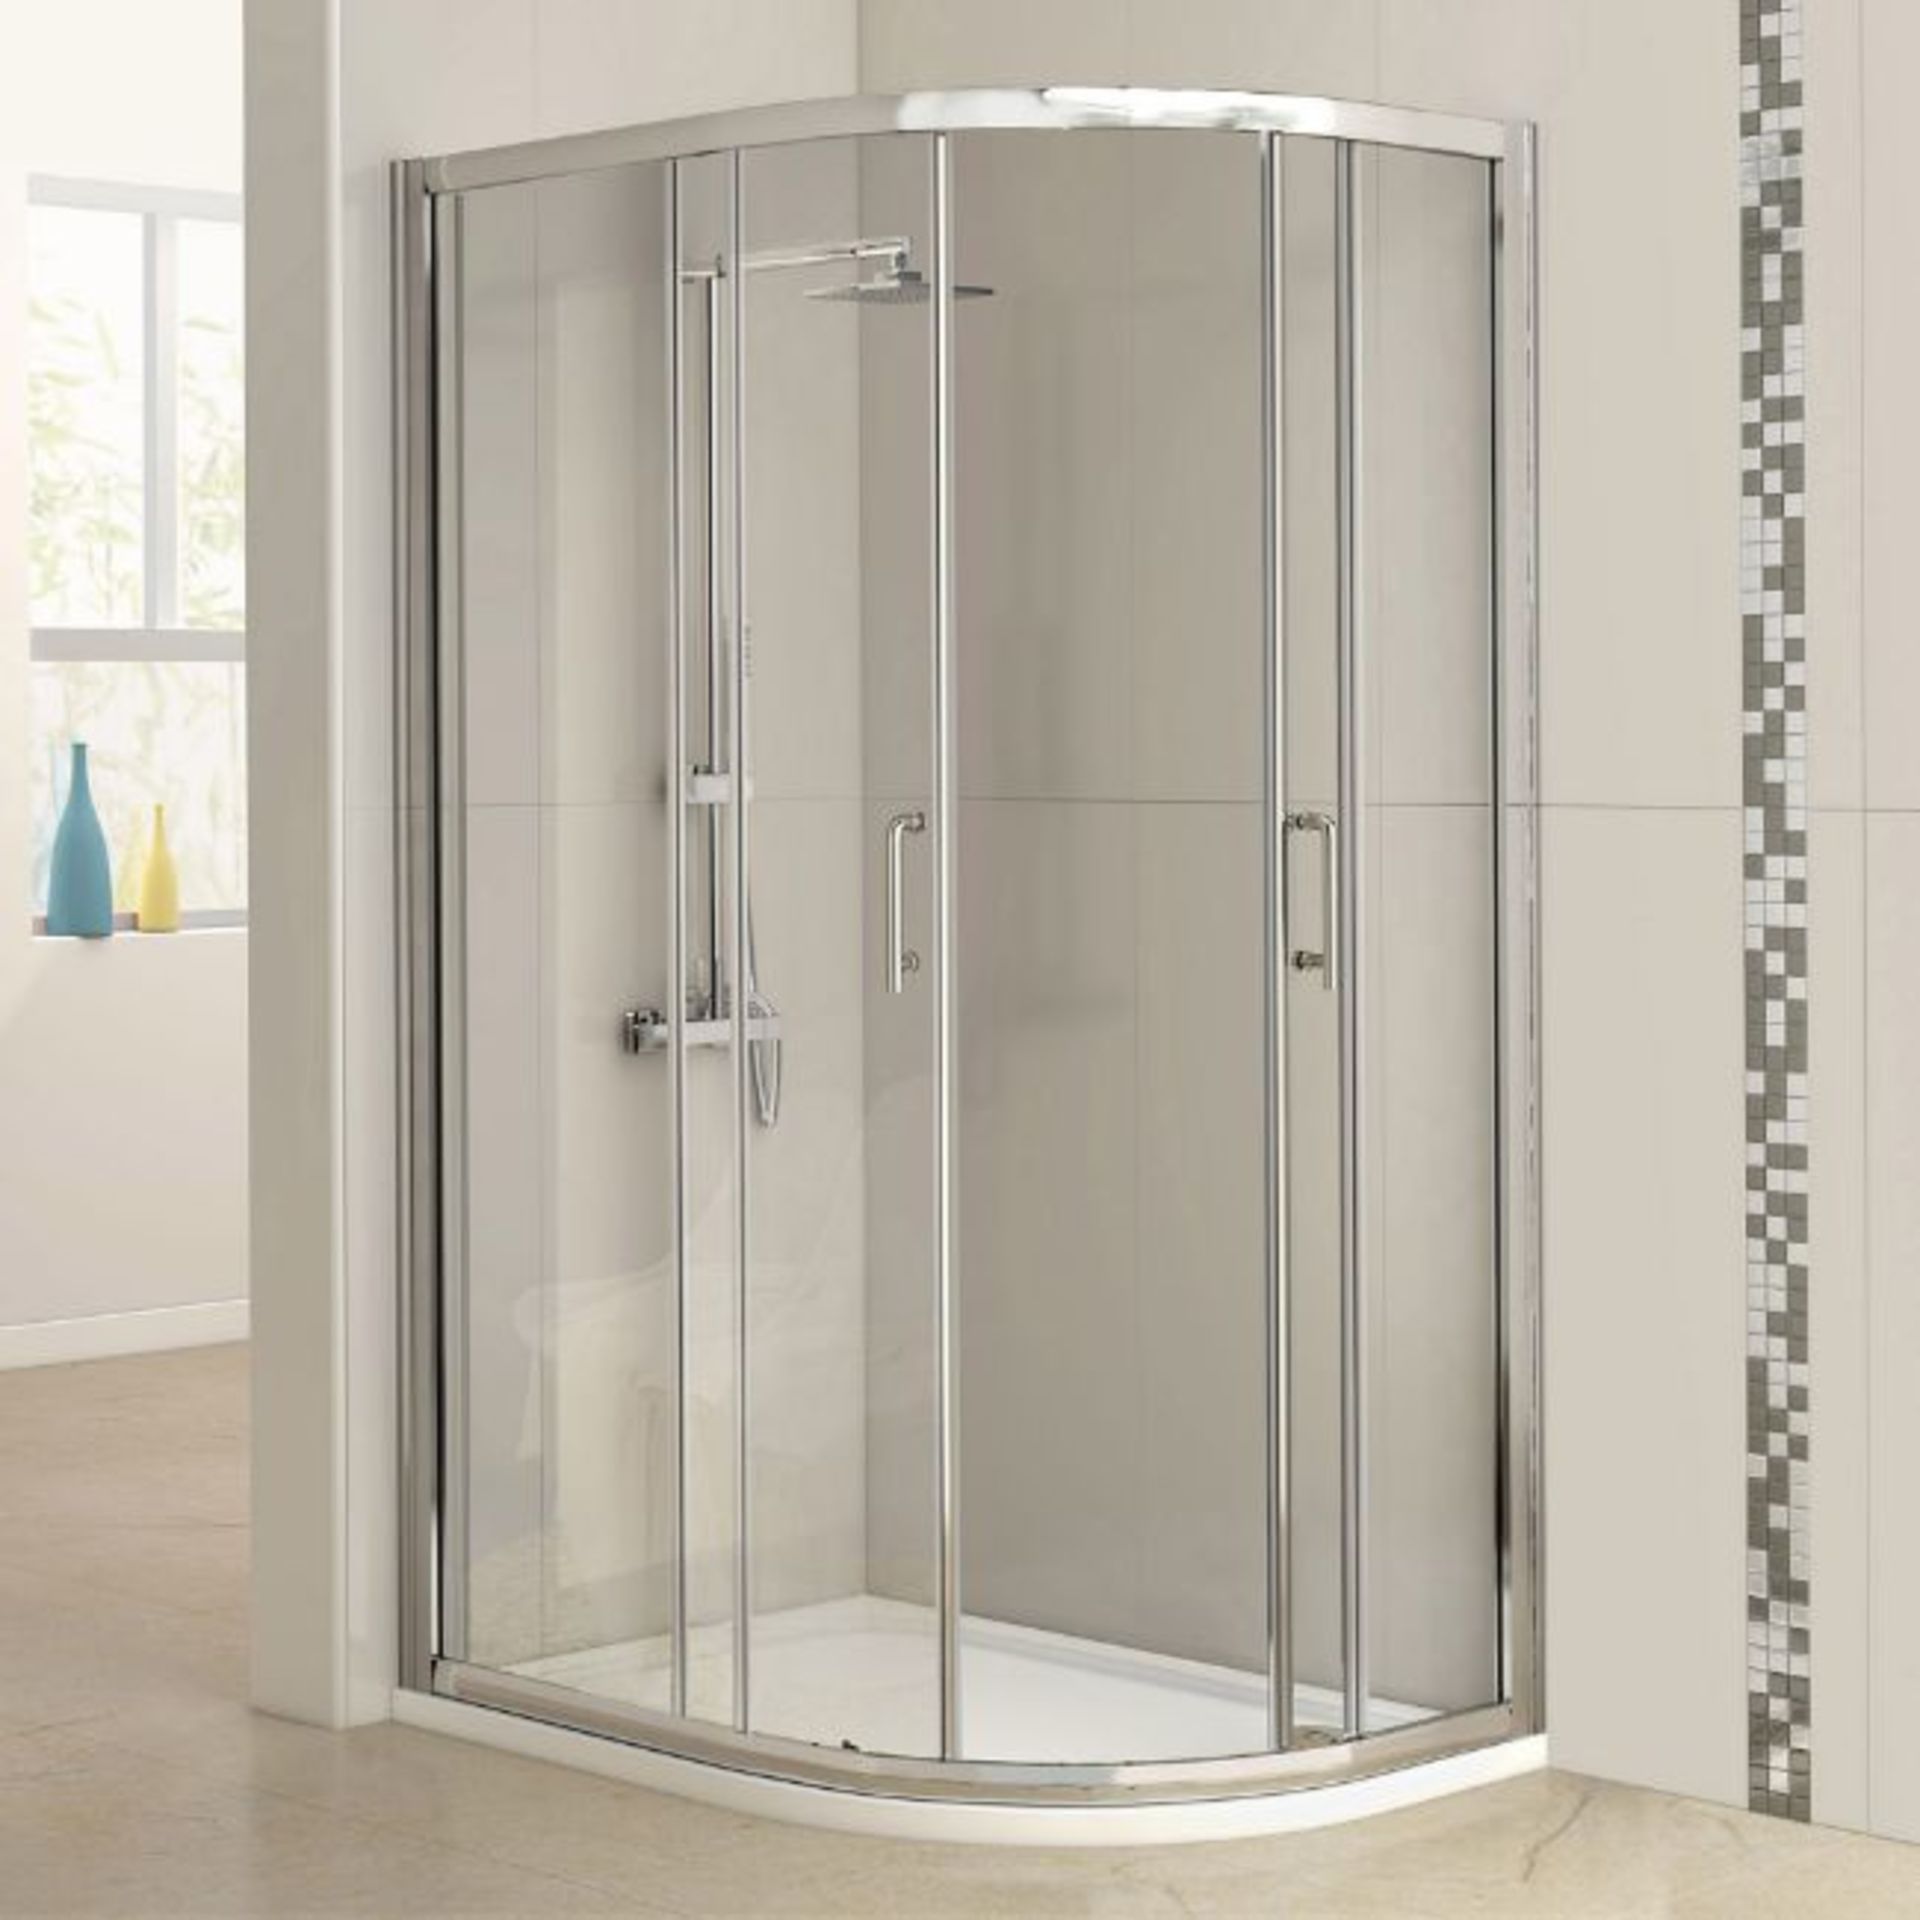 (REF84) 1200x900mm - 6mm - Offset Quadrant Shower Enclosure. RRP £599.99.Make the most of tha... - Image 4 of 4